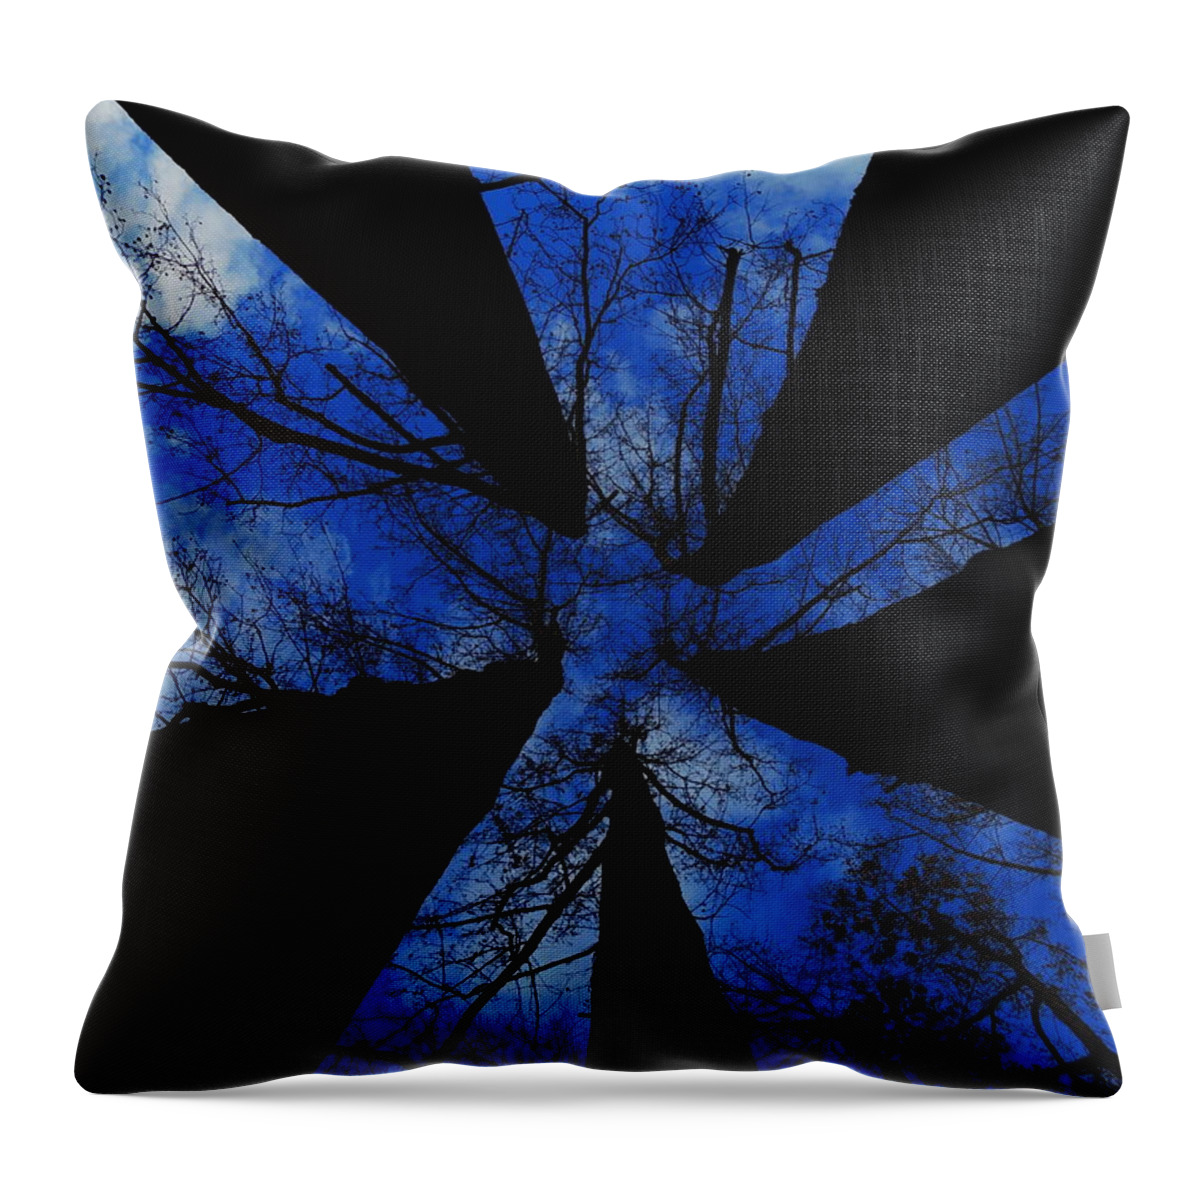 Trees Throw Pillow featuring the photograph Looking Up by Raymond Salani III